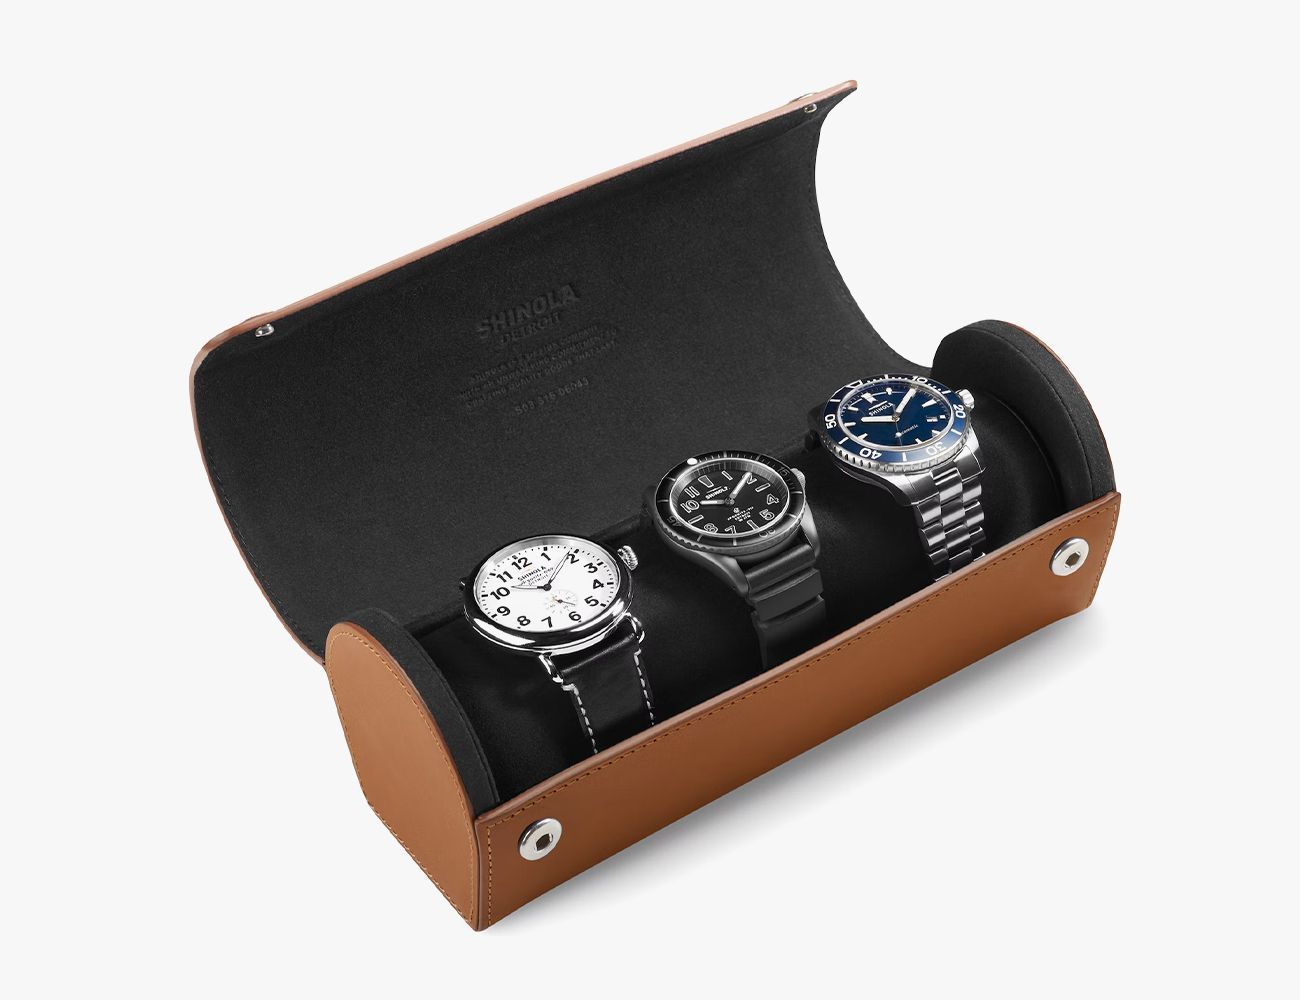 BAGAHOLICBOY SHOPS: Travel In Style With These 5 Watch Cases